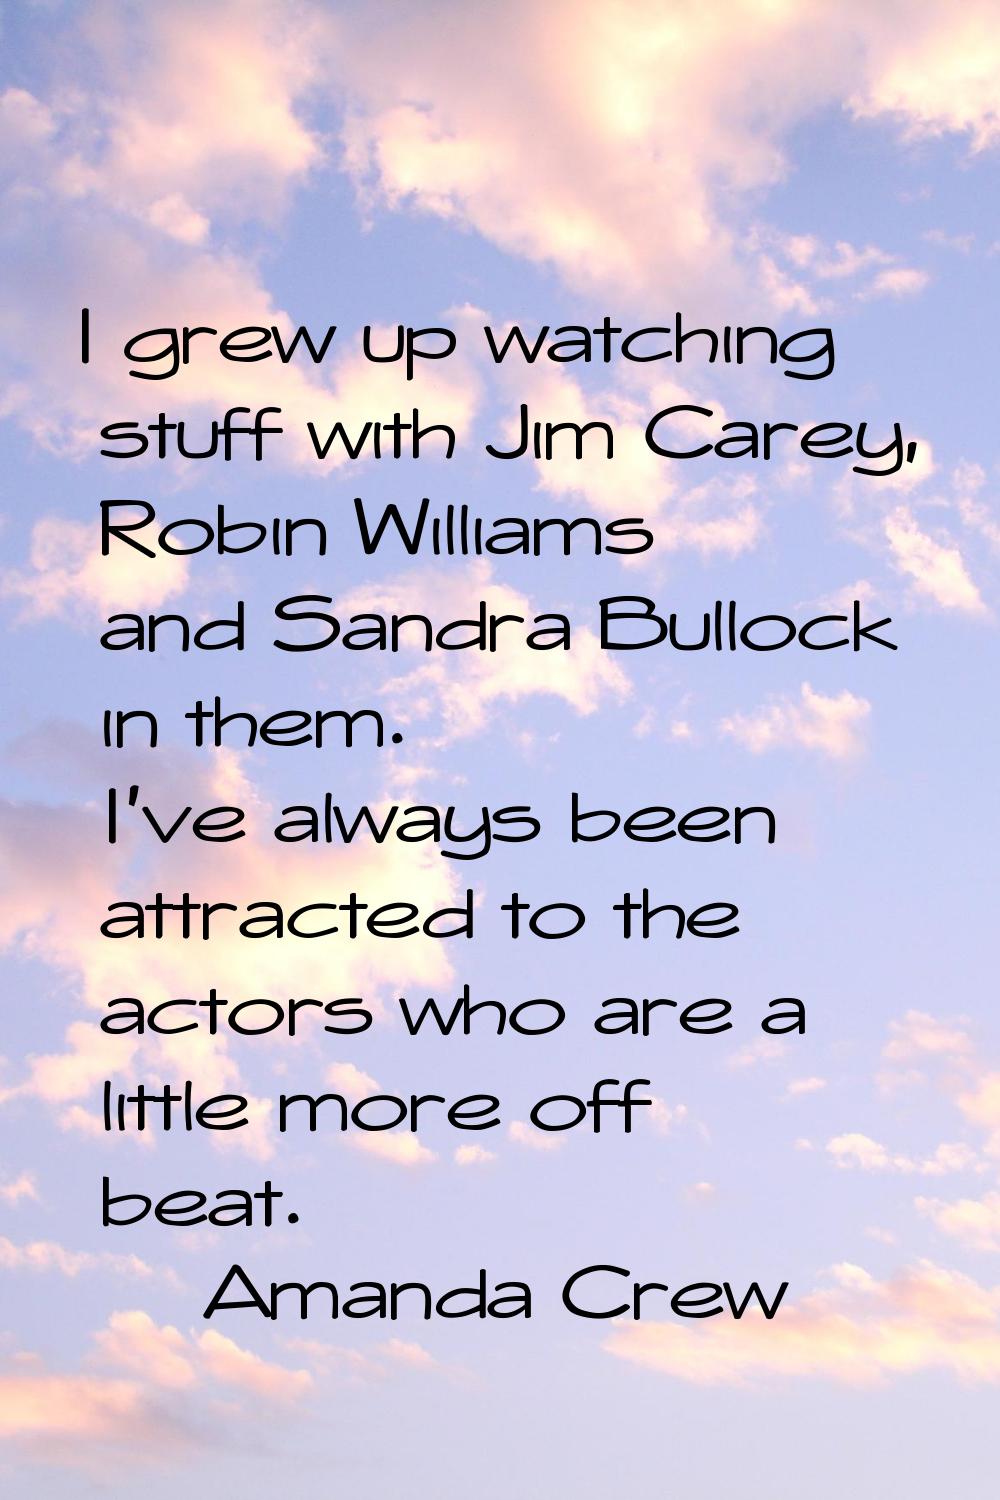 I grew up watching stuff with Jim Carey, Robin Williams and Sandra Bullock in them. I've always bee